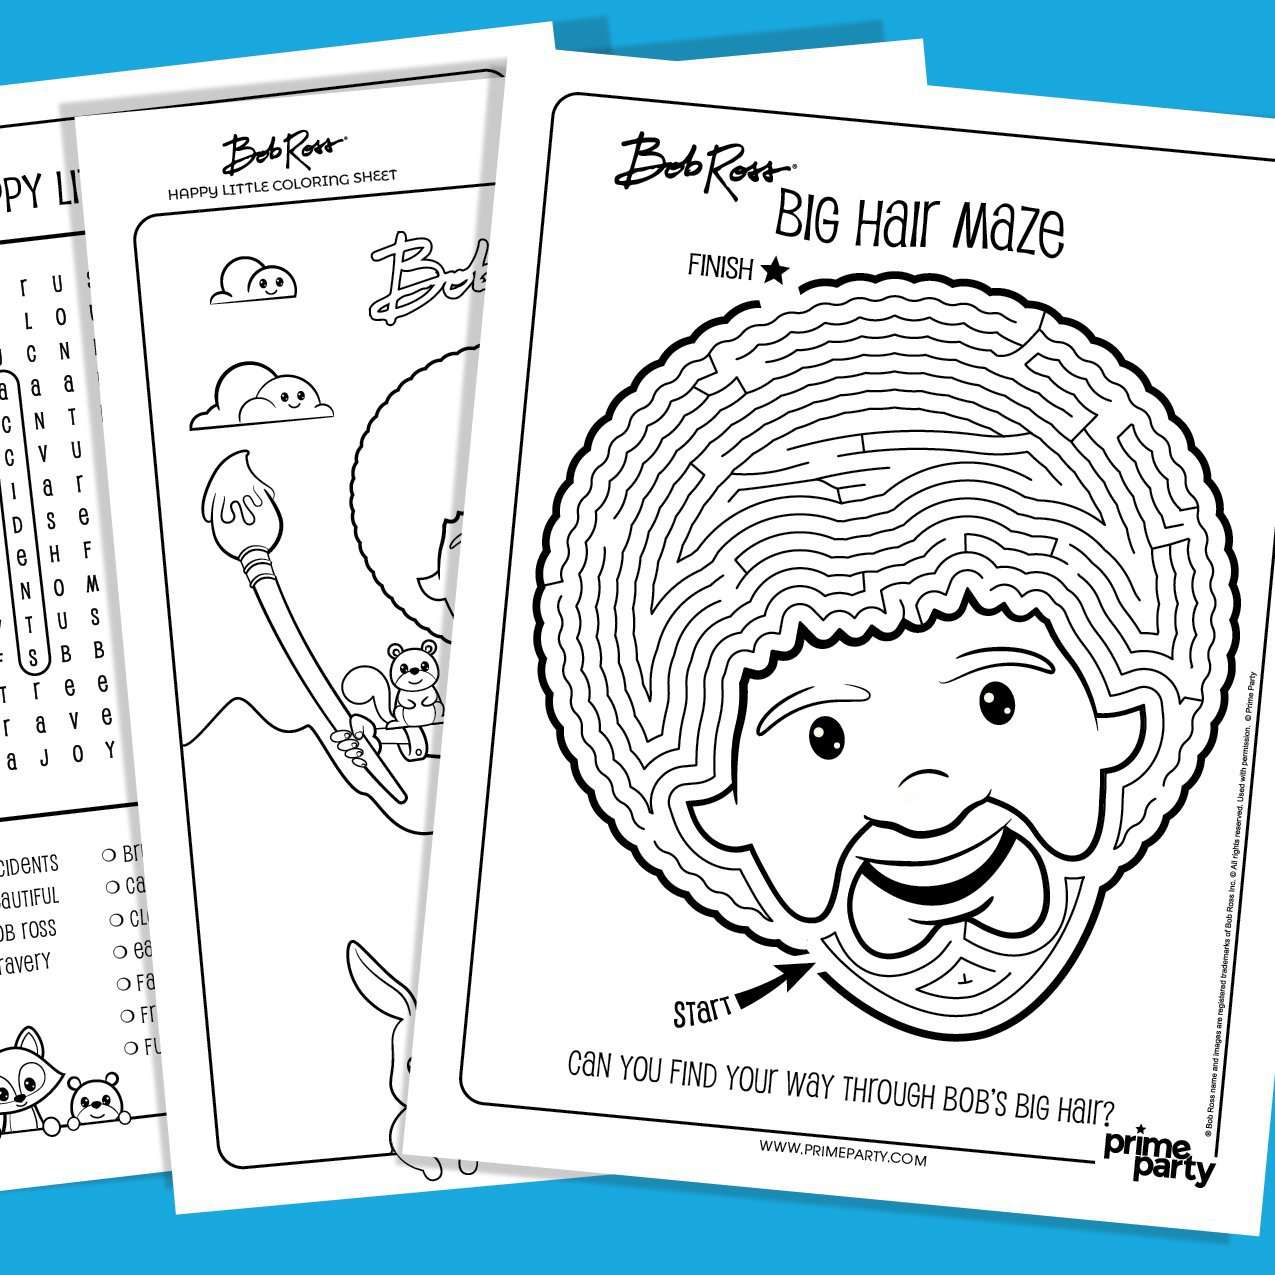 Bob Ross for Kids: Happy Lessons in a Box